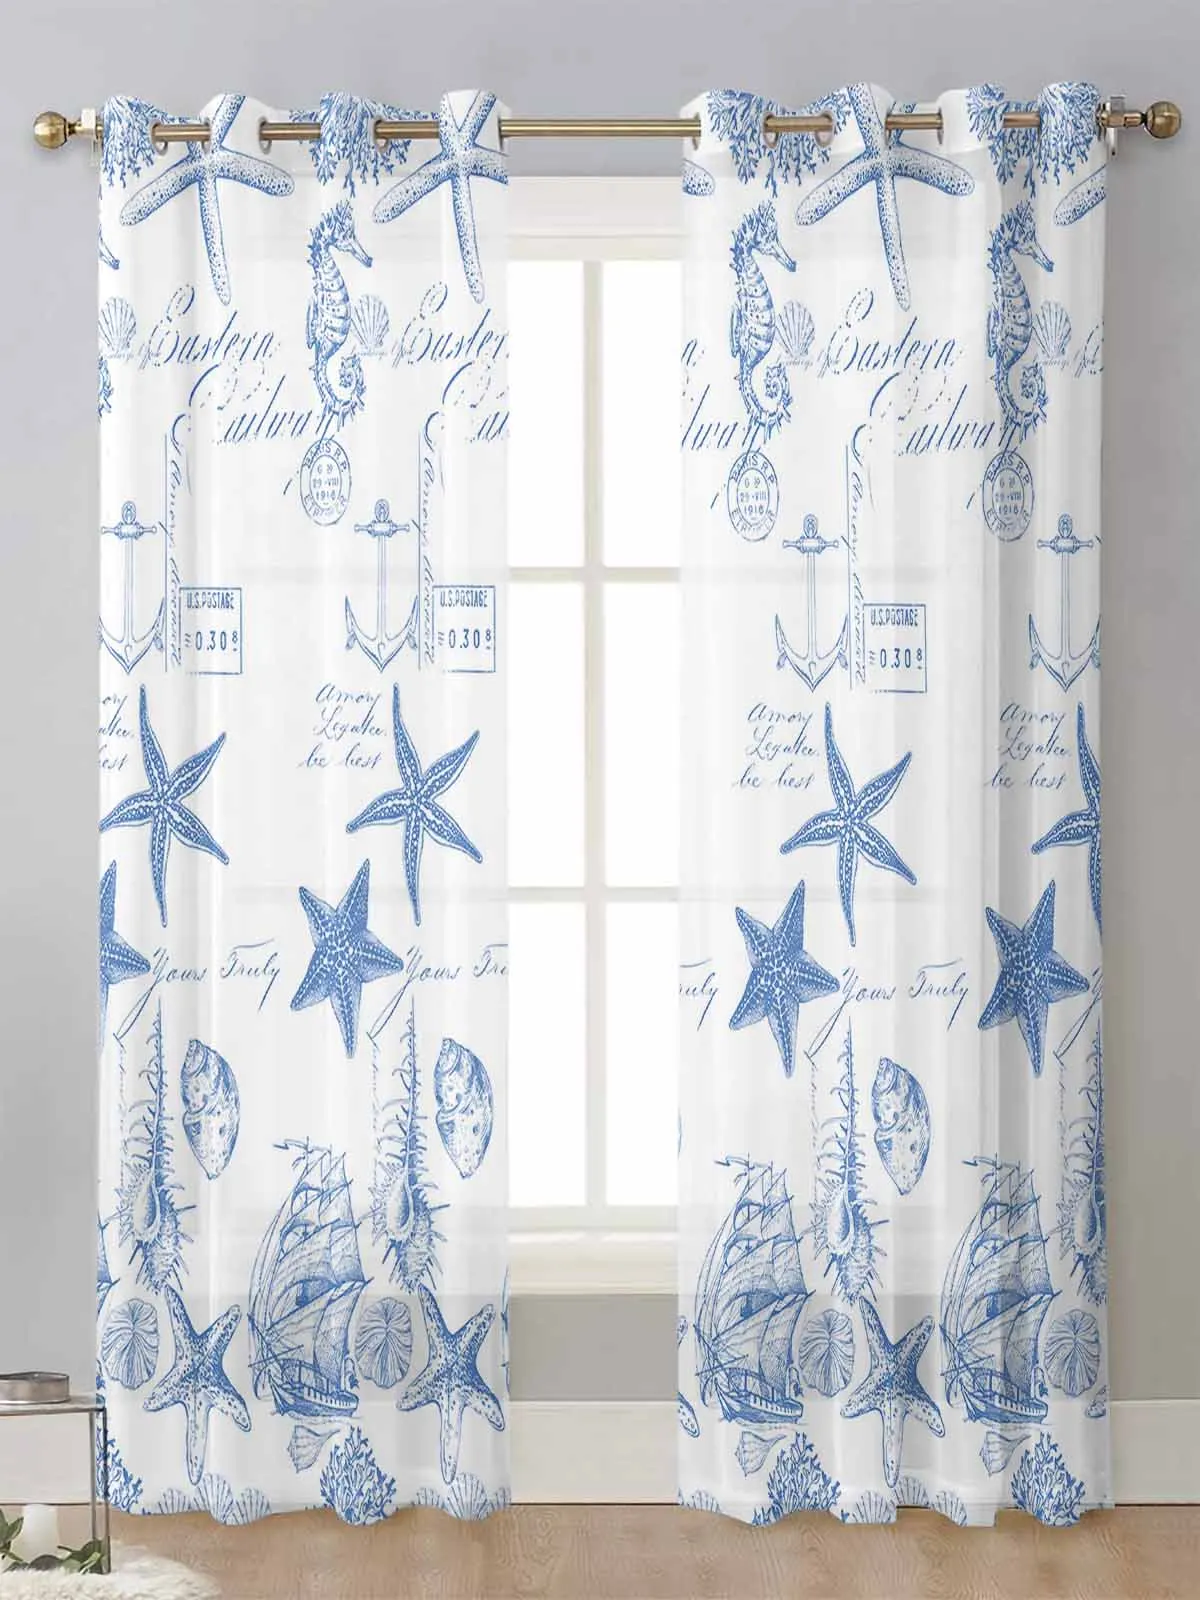 

Blue Ocean Starfish Conch Seahorse Anchor Sheer Curtains For Living Room Window Voile Tulle Curtain Cortinas Drapes Home Decor